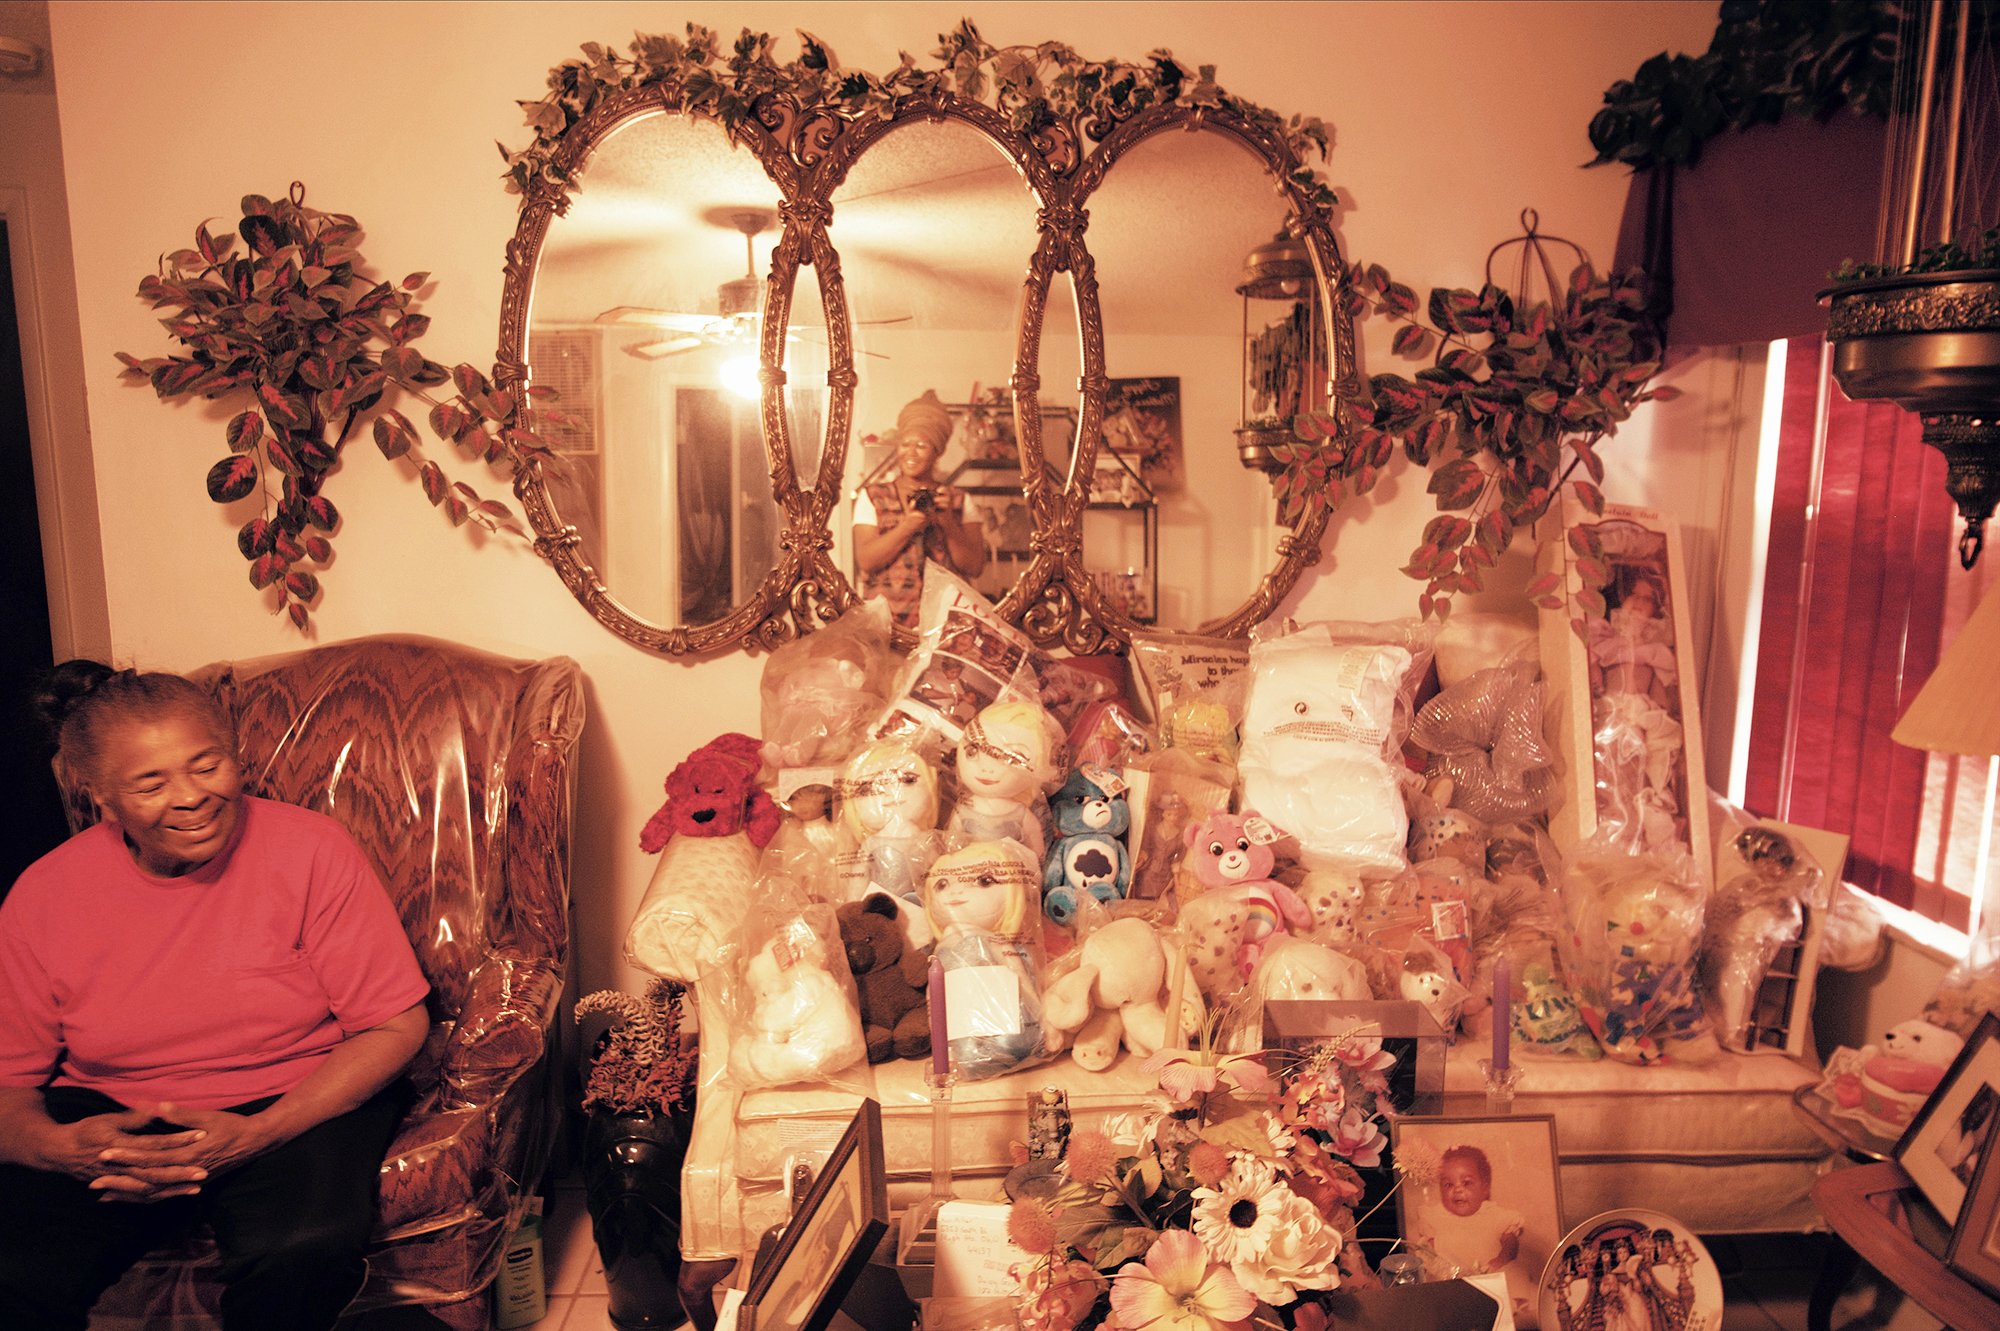 The lady sitting in a chair next to a sofa filled with soft toys, a large mirror piece on the wall.